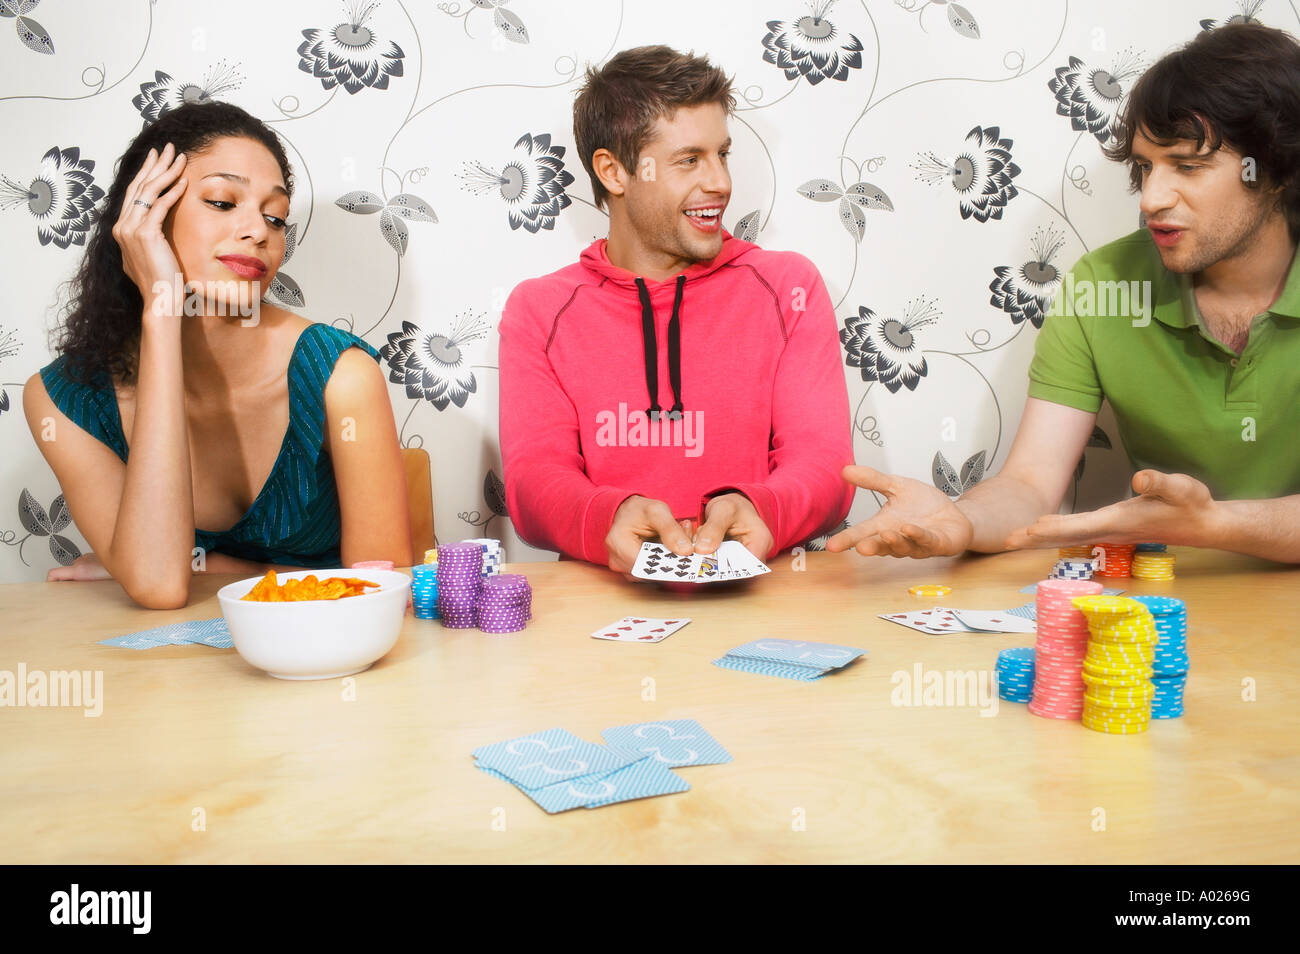 Friends Playing Cards, man showing winning hand Stock Photo